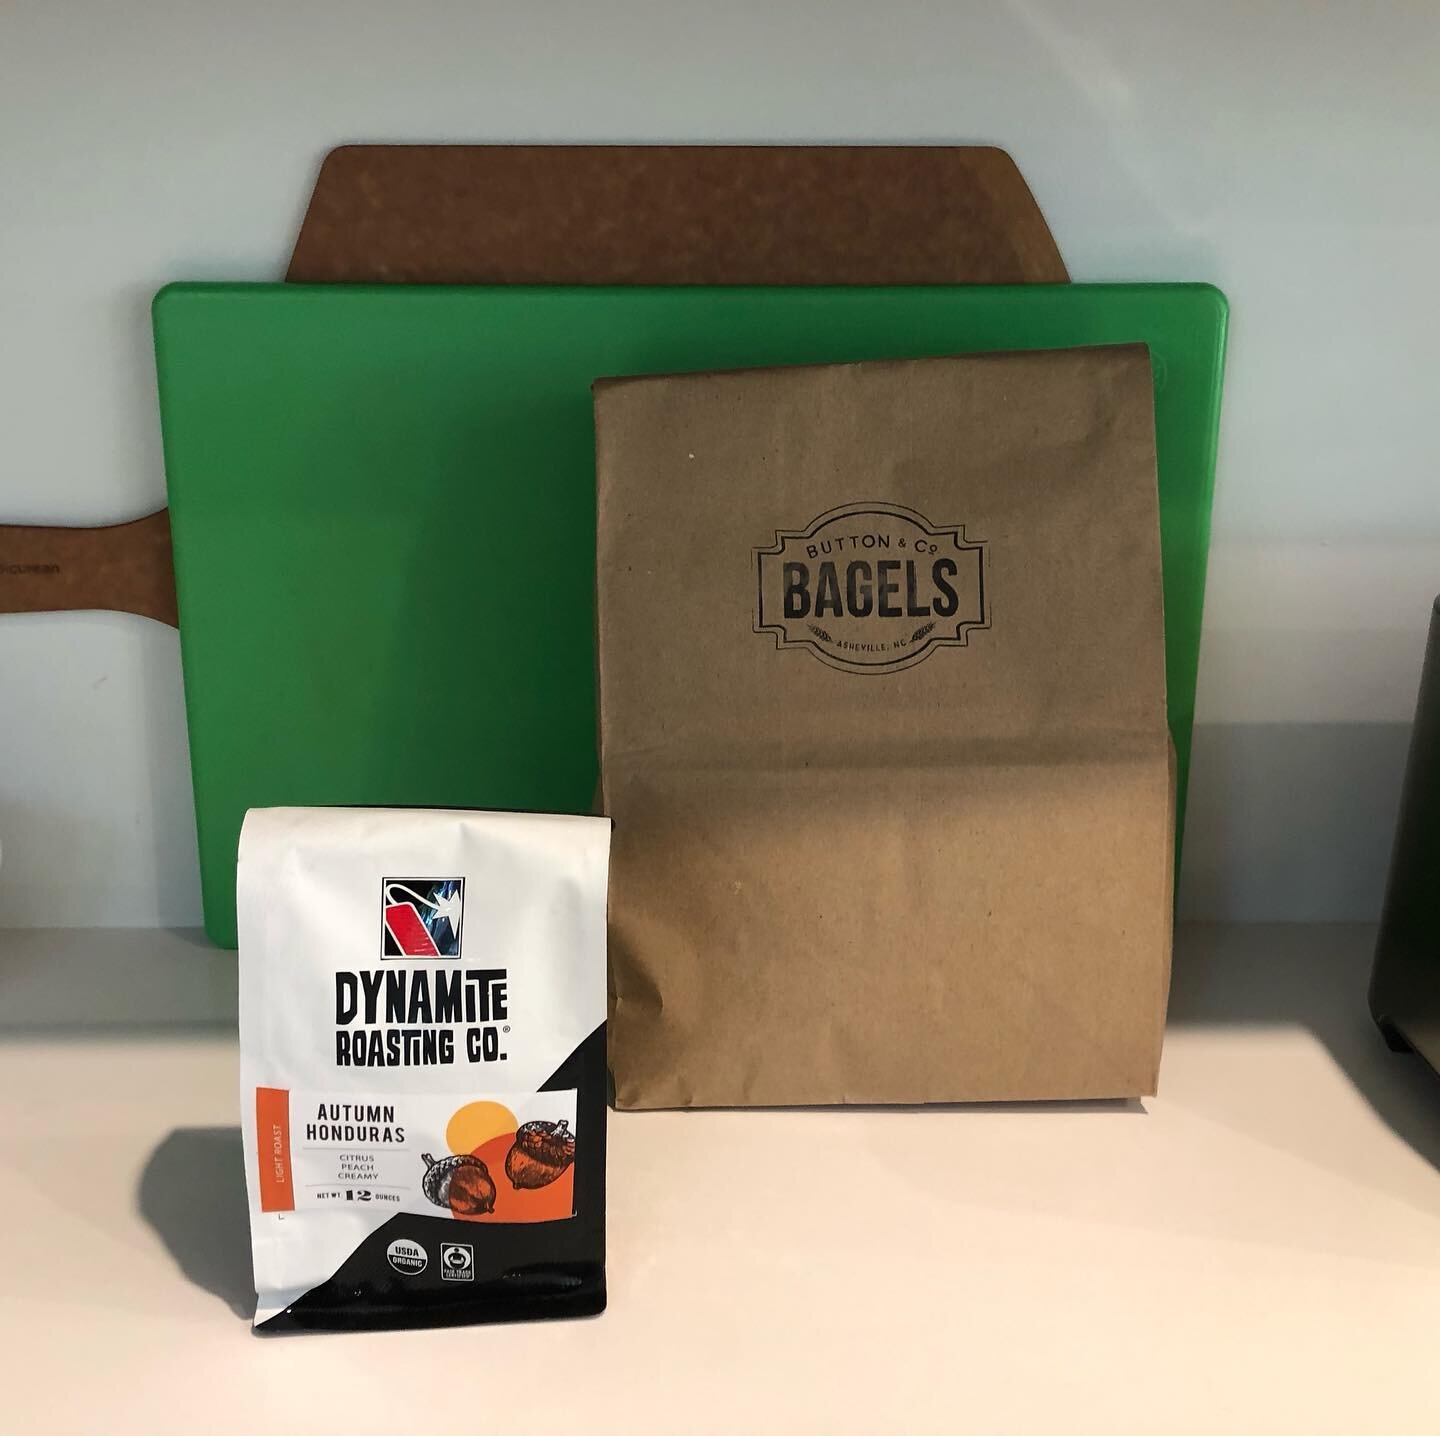 Did you know we provide all kinds of goodies for our guests? Complimentary locally roasted coffee and organic creamer, farm fresh eggs, and fresh made bagels and cream cheese from @buttonbagels .
.
.
#asheville #ashevillenc #ashevilleairbnb #coffee #